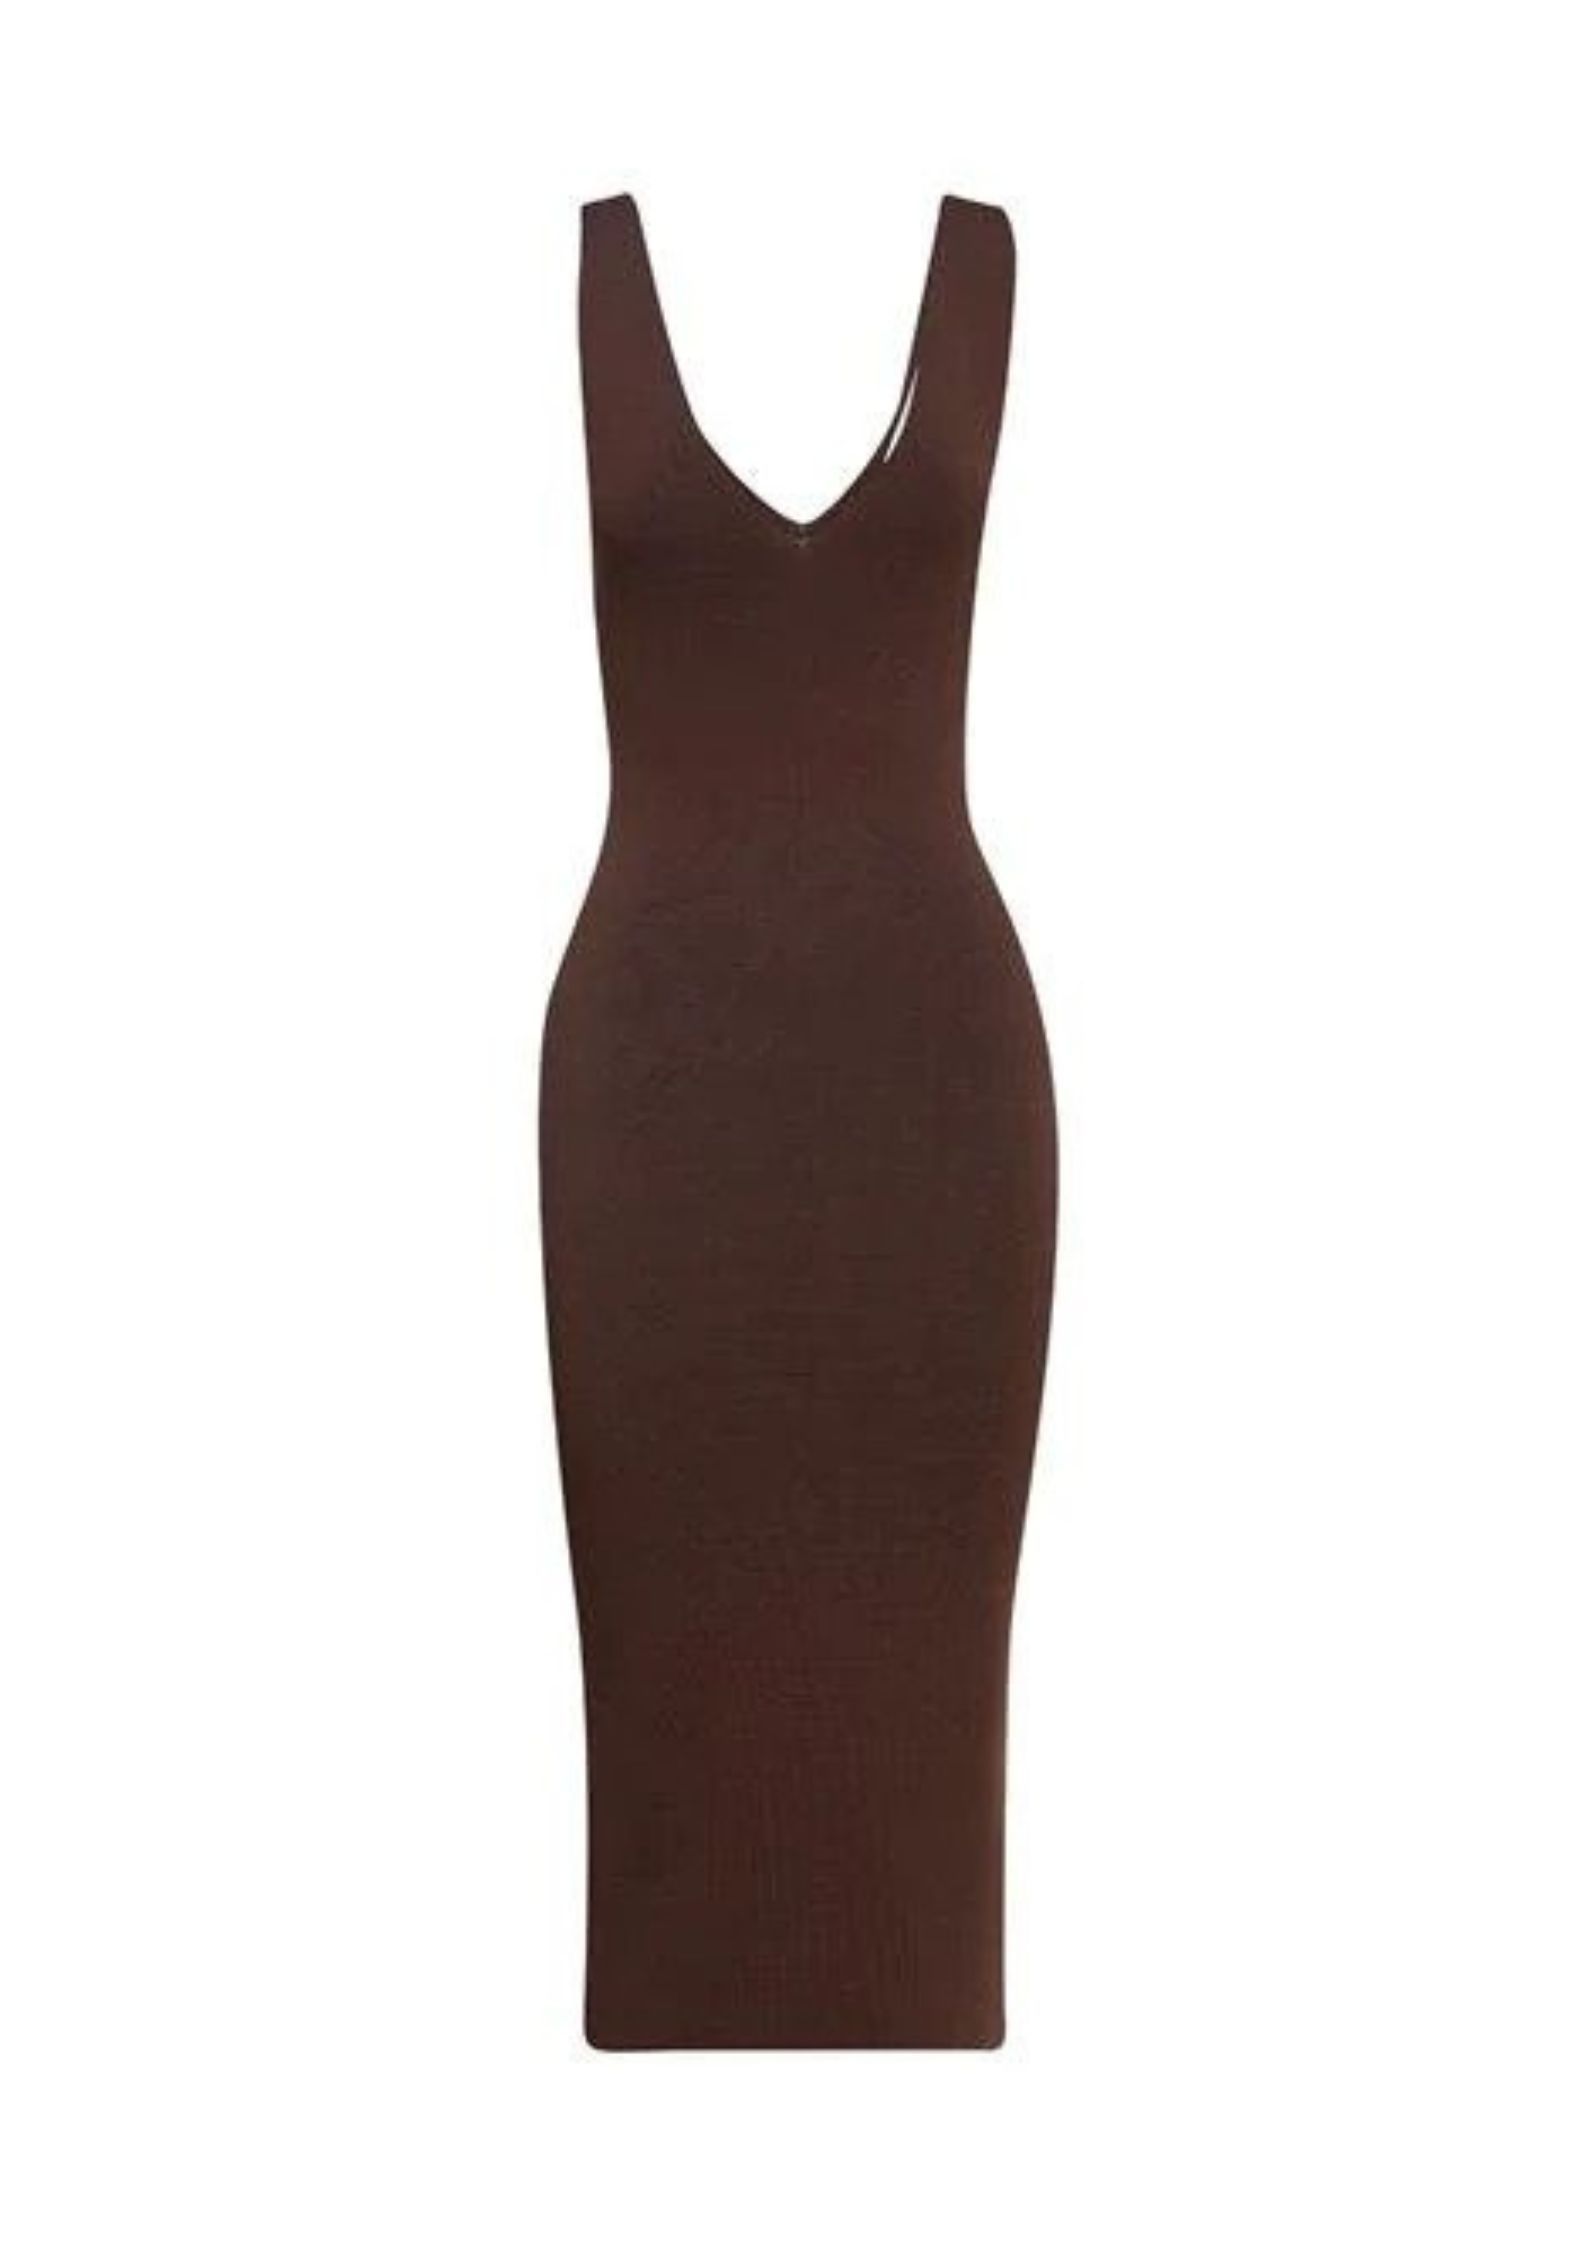 Ministry of Style Rustic Knit Midi Dress